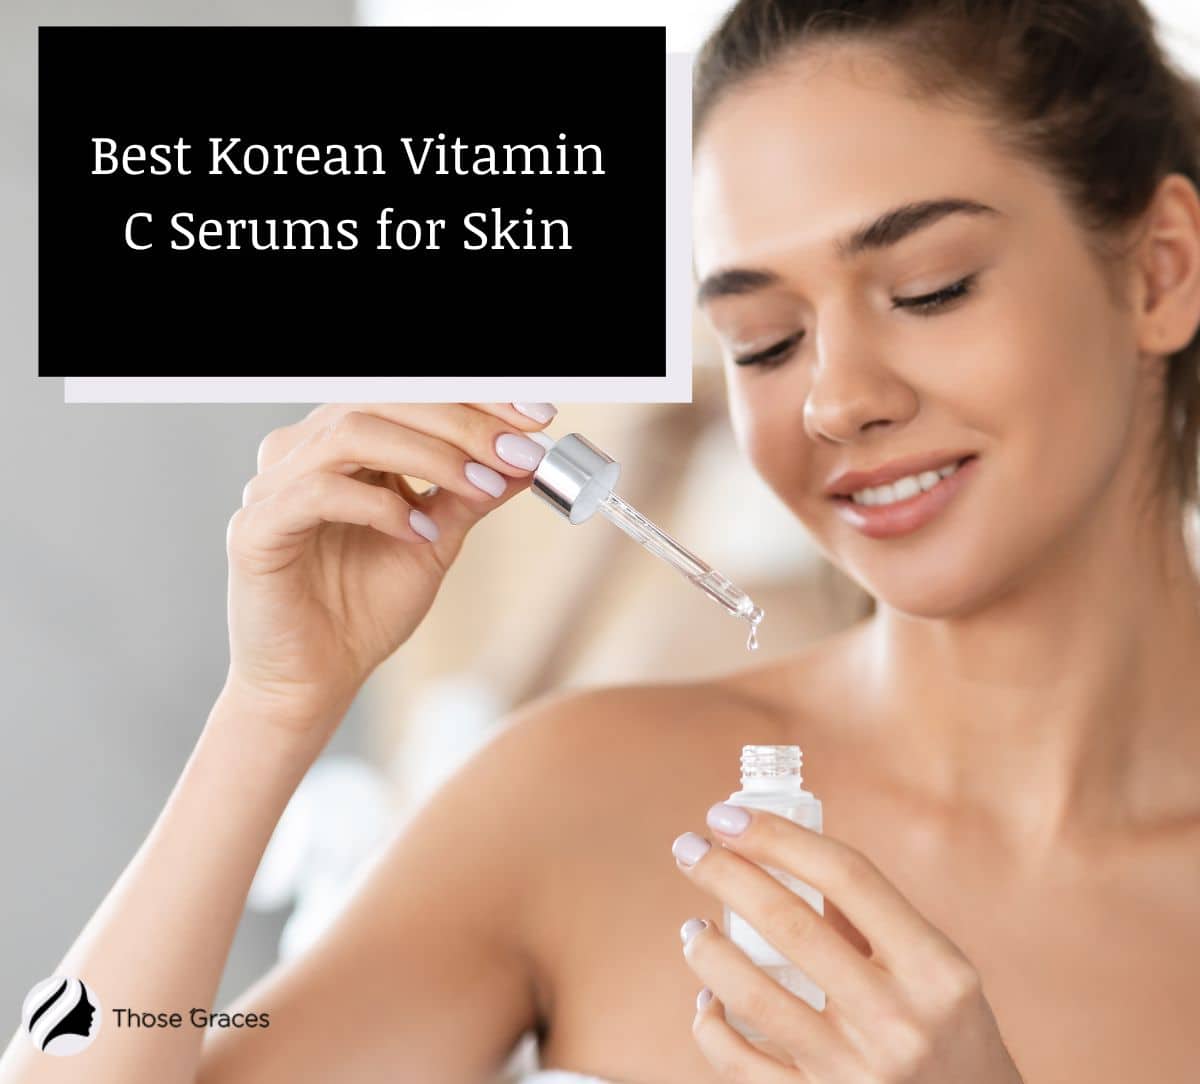 Lady holding one of the best Korean Vitamin C Serums for Skin